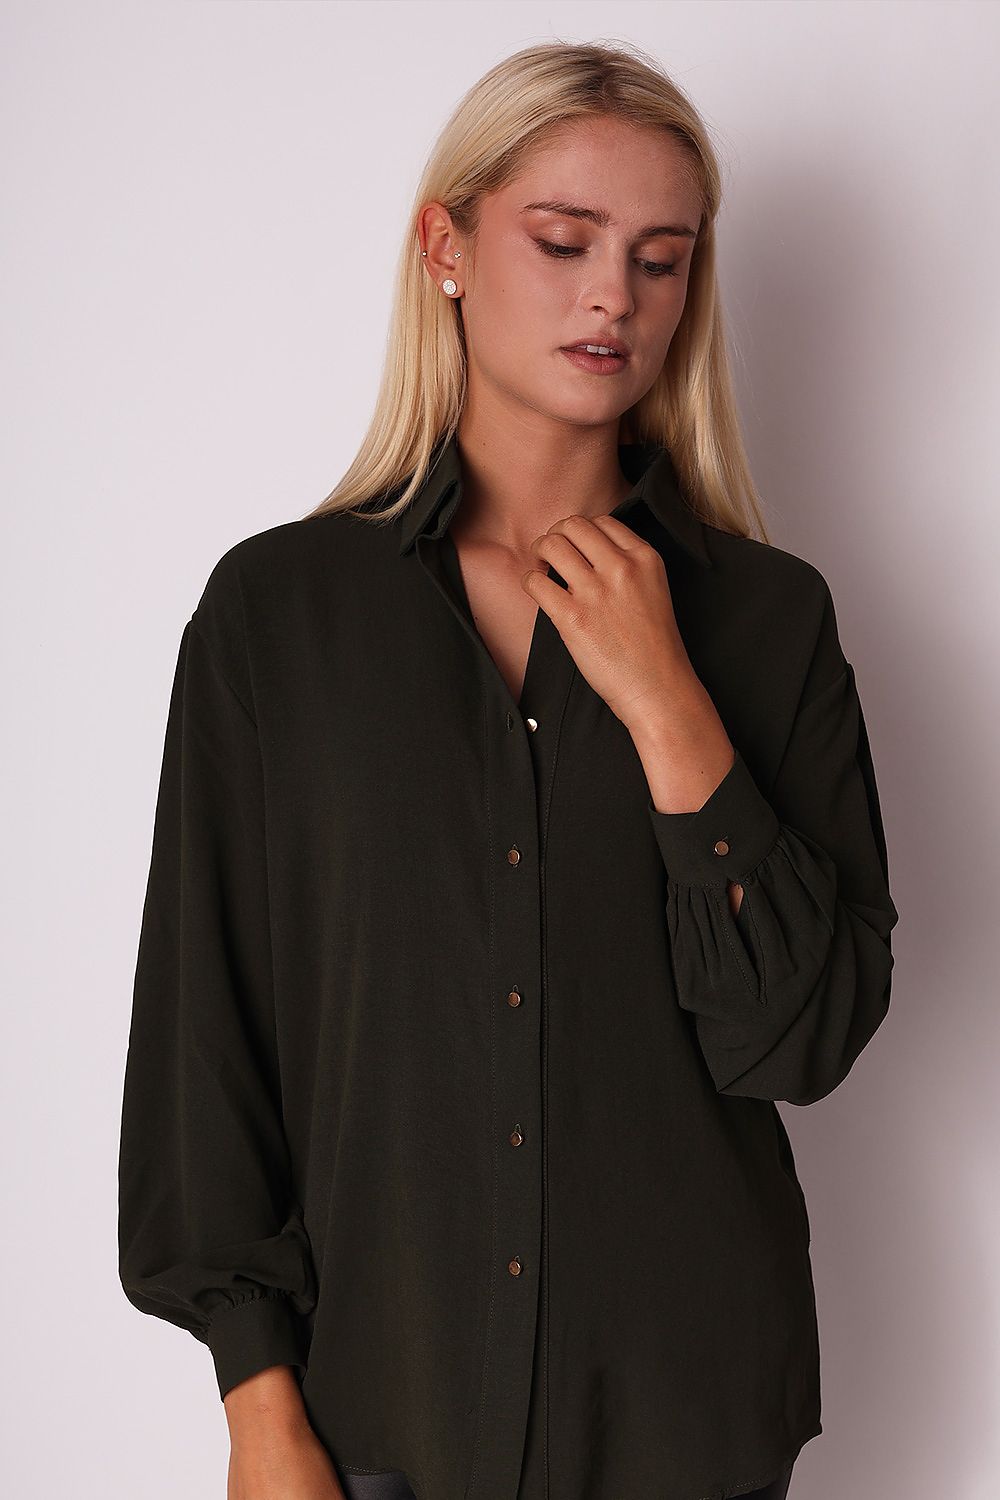 Long sleeve olive gold button down shirt